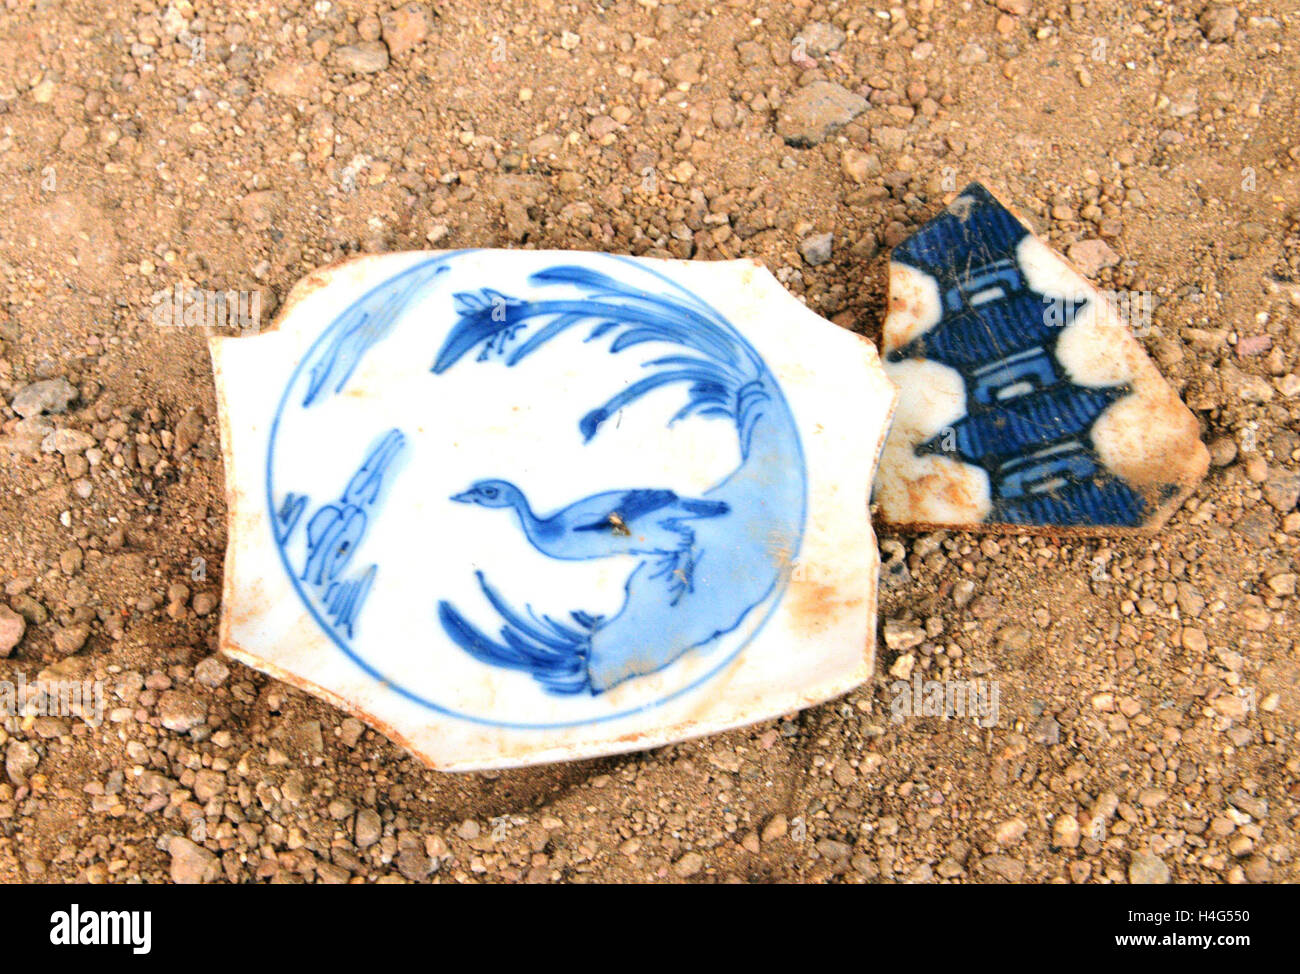 (161015) -- ACAPULCO (MEXICO), Oct. 15, 2016 (Xinhua) -- Photo taken on Oct. 5, 2016, shows antique Chinese porcelain fragments in the city of Acapulco, Mexico. A new archaeological find announced on Friday in Mexico attests to China's age-old vocation as an exporting powerhouse. Mexican archaeologists have uncovered thousands of fragments of a 400-year-old shipment of Chinese 'export-quality porcelain' that was long buried in the Pacific Coast port of Acapulco. (Xinhua/Meliton Tapia/INAH) (lr) Stock Photo